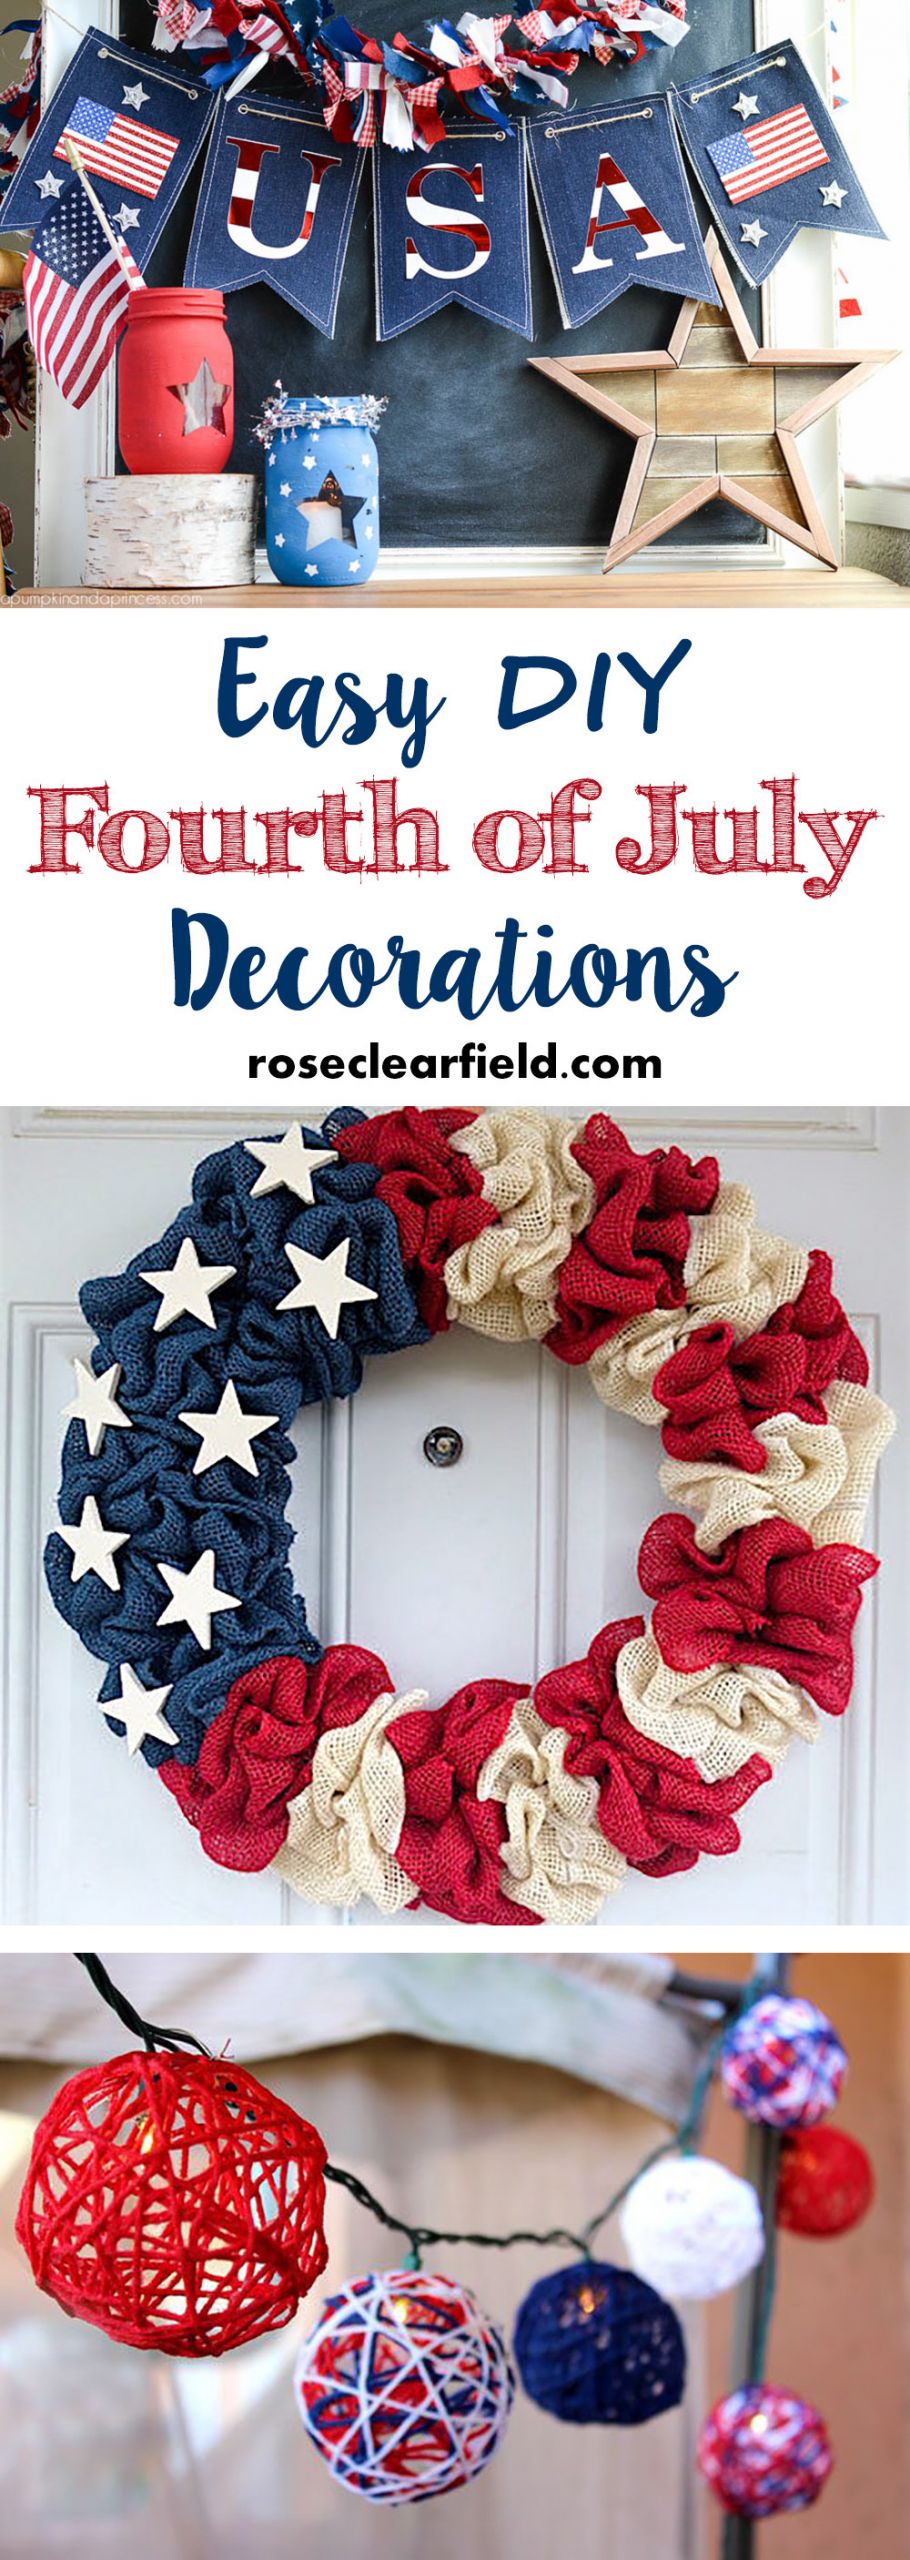 4th Of July Ideas
 Easy DIY Fourth of July Decorations • Rose Clearfield